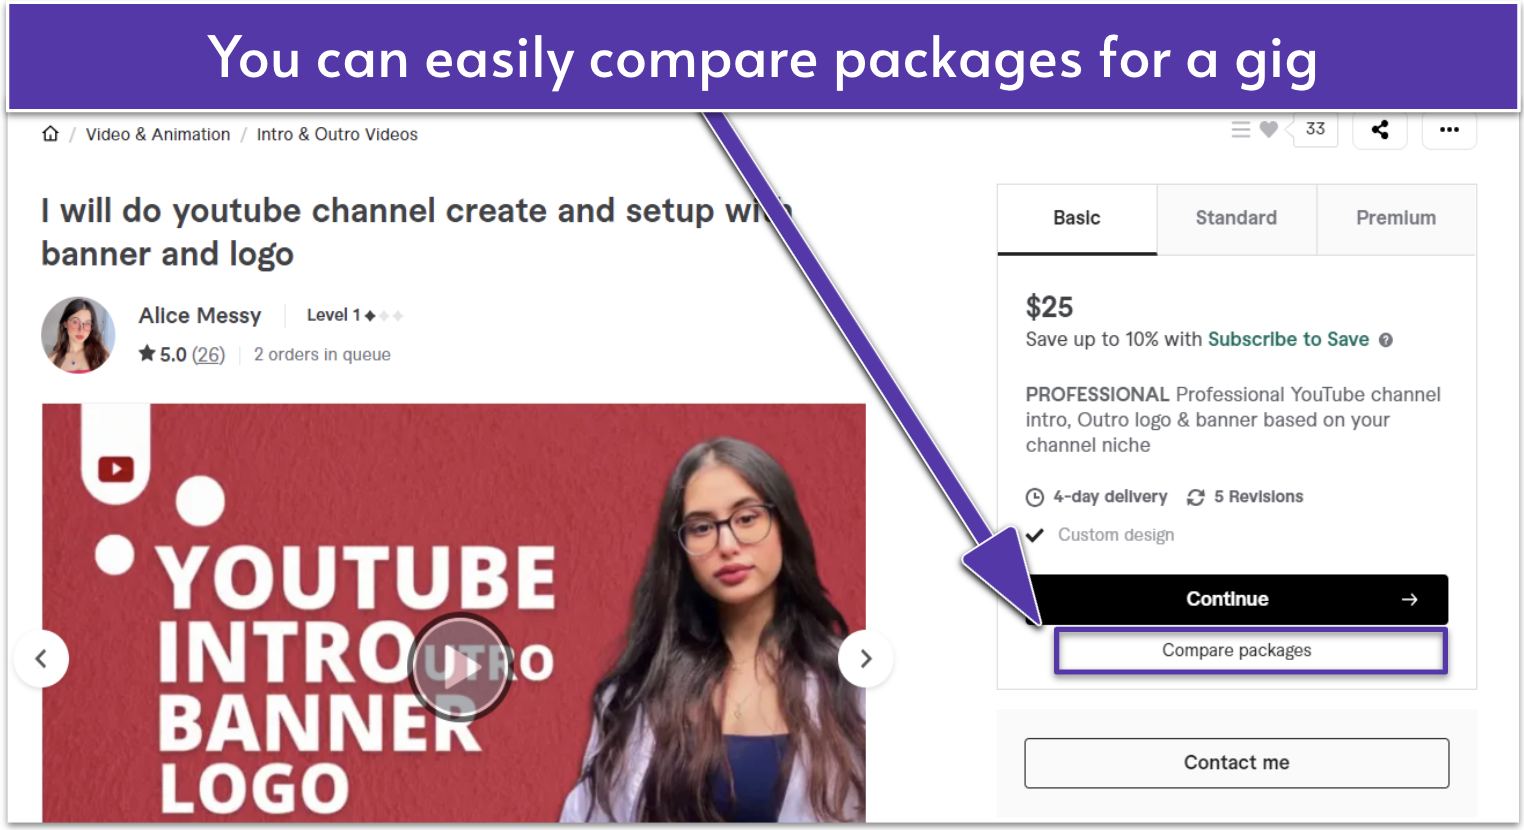 The "Compare packages" button highlighted on a YouTube expert's gig page on Fiverr